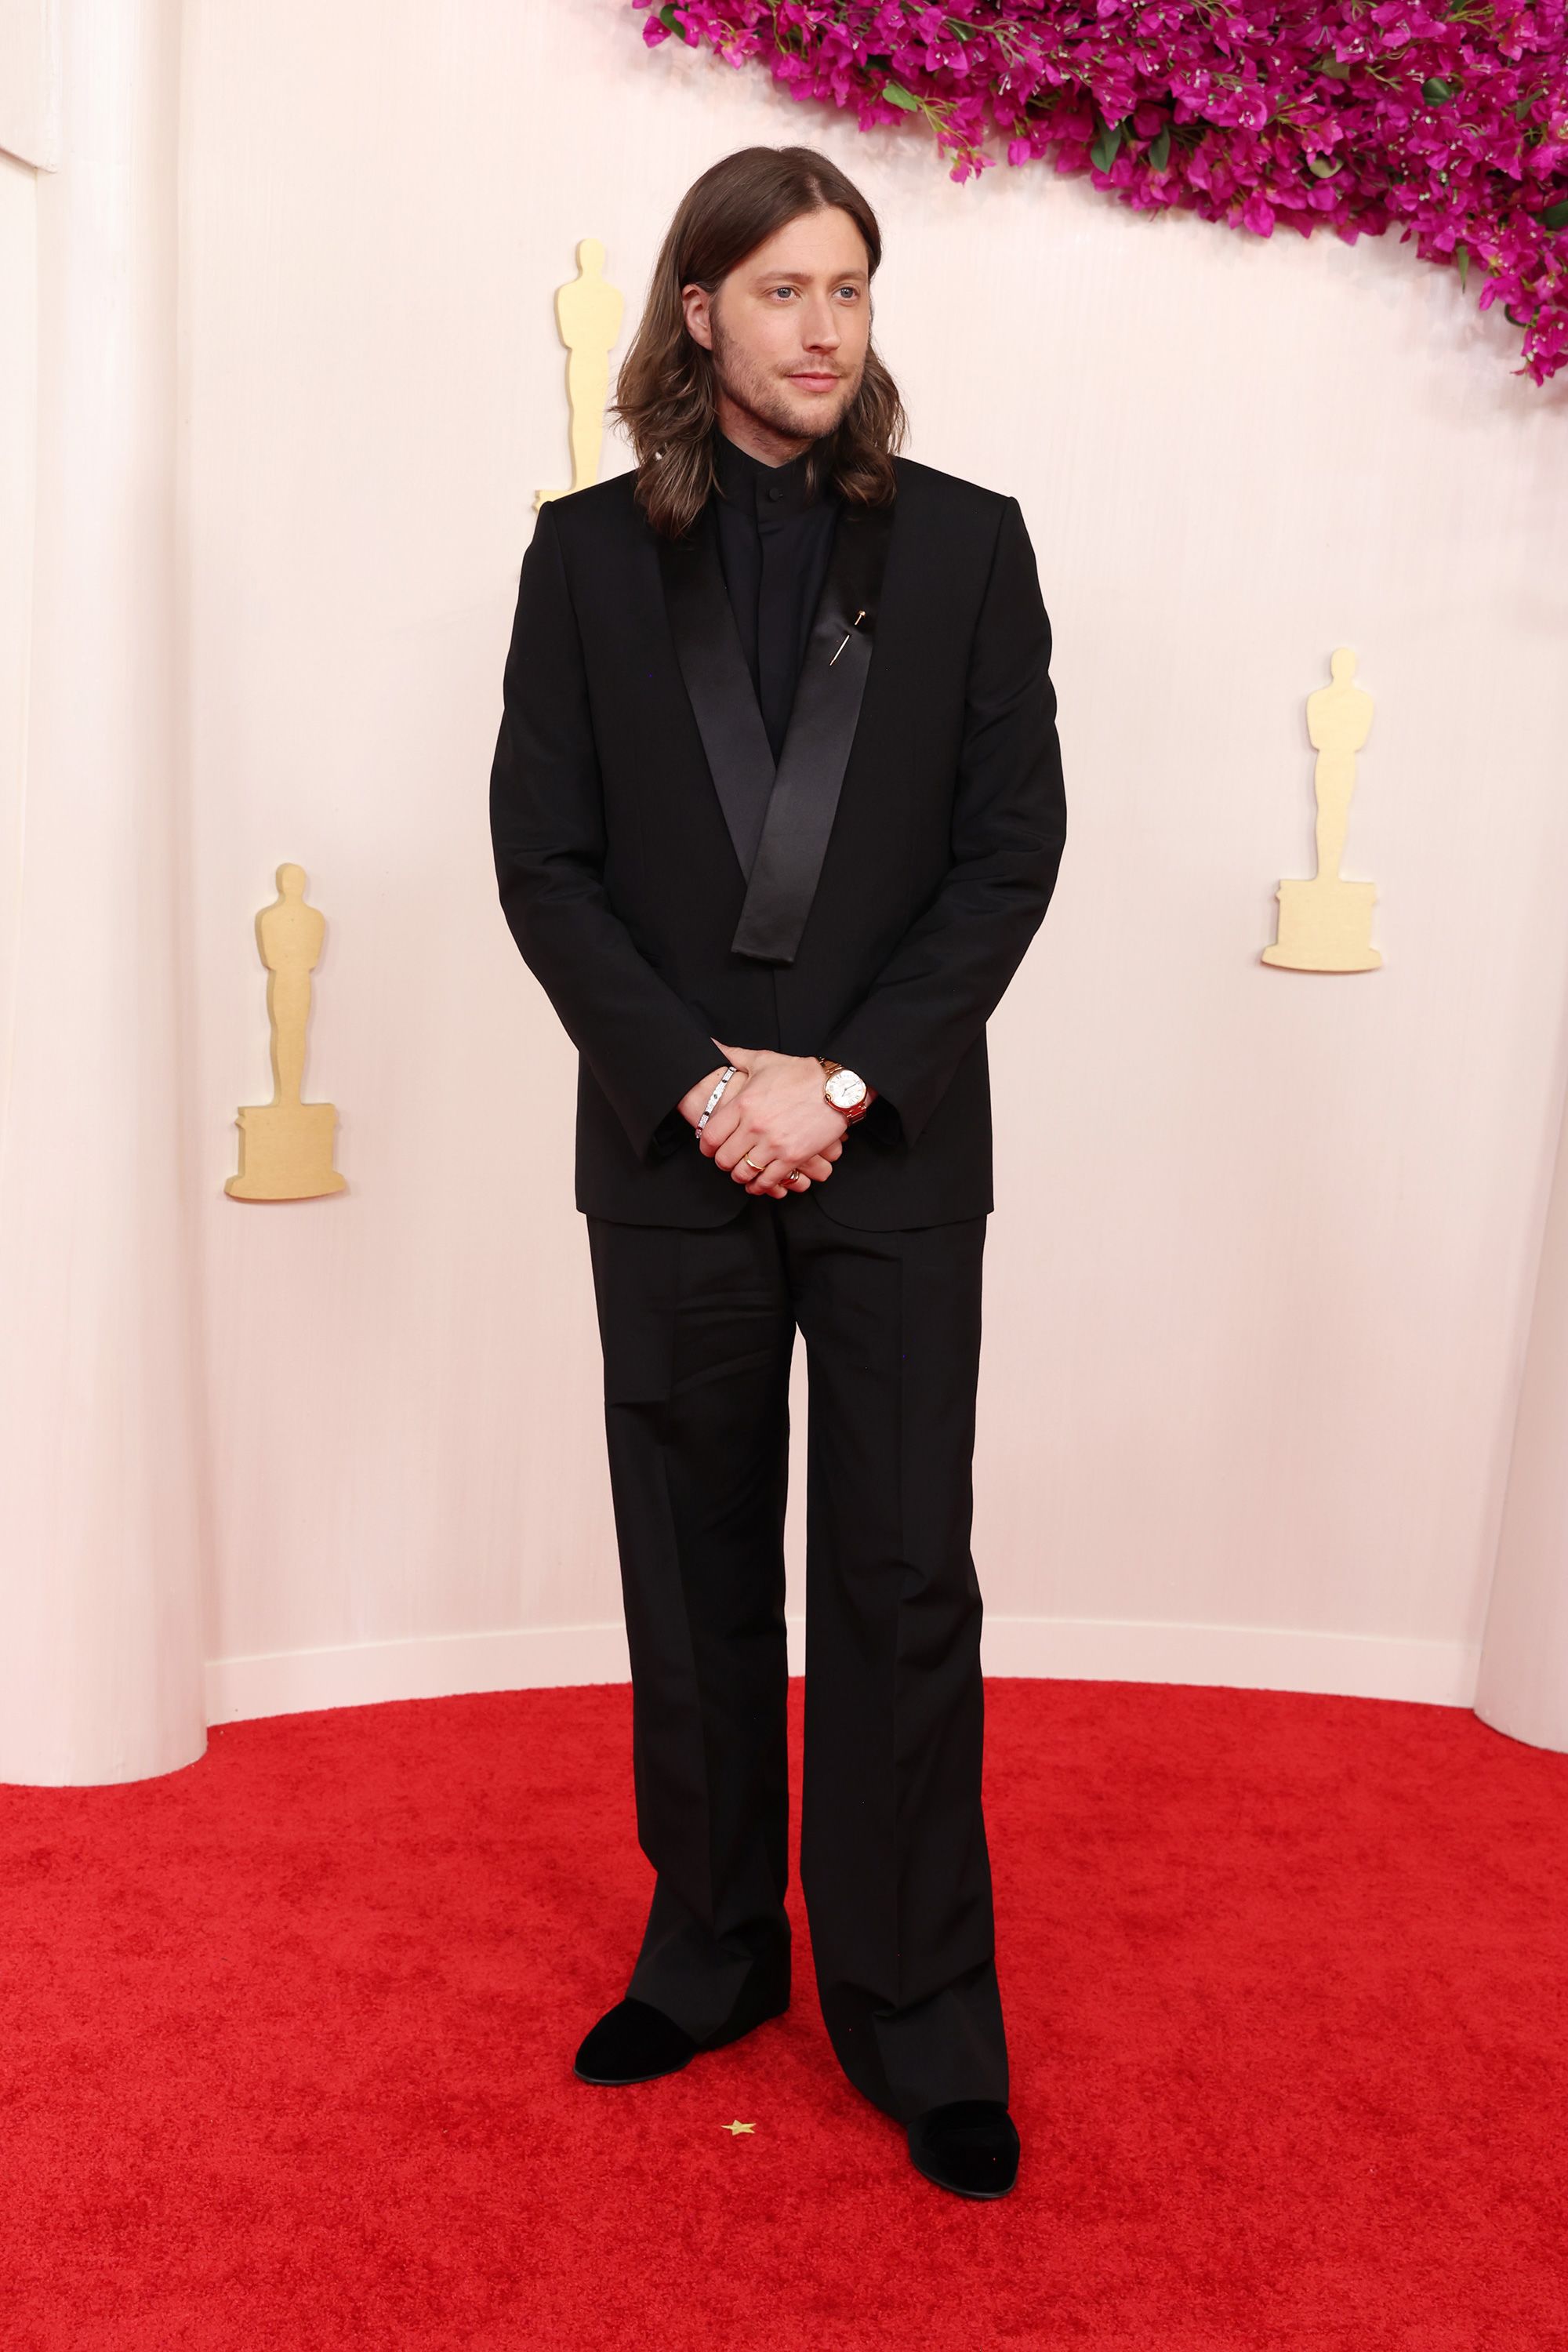 Composer Ludwig Göransson, nominated for Best Original Music for “Oppenheimer,” wore an all-black suit with an eloquent silver brooch pinned to his lapel.